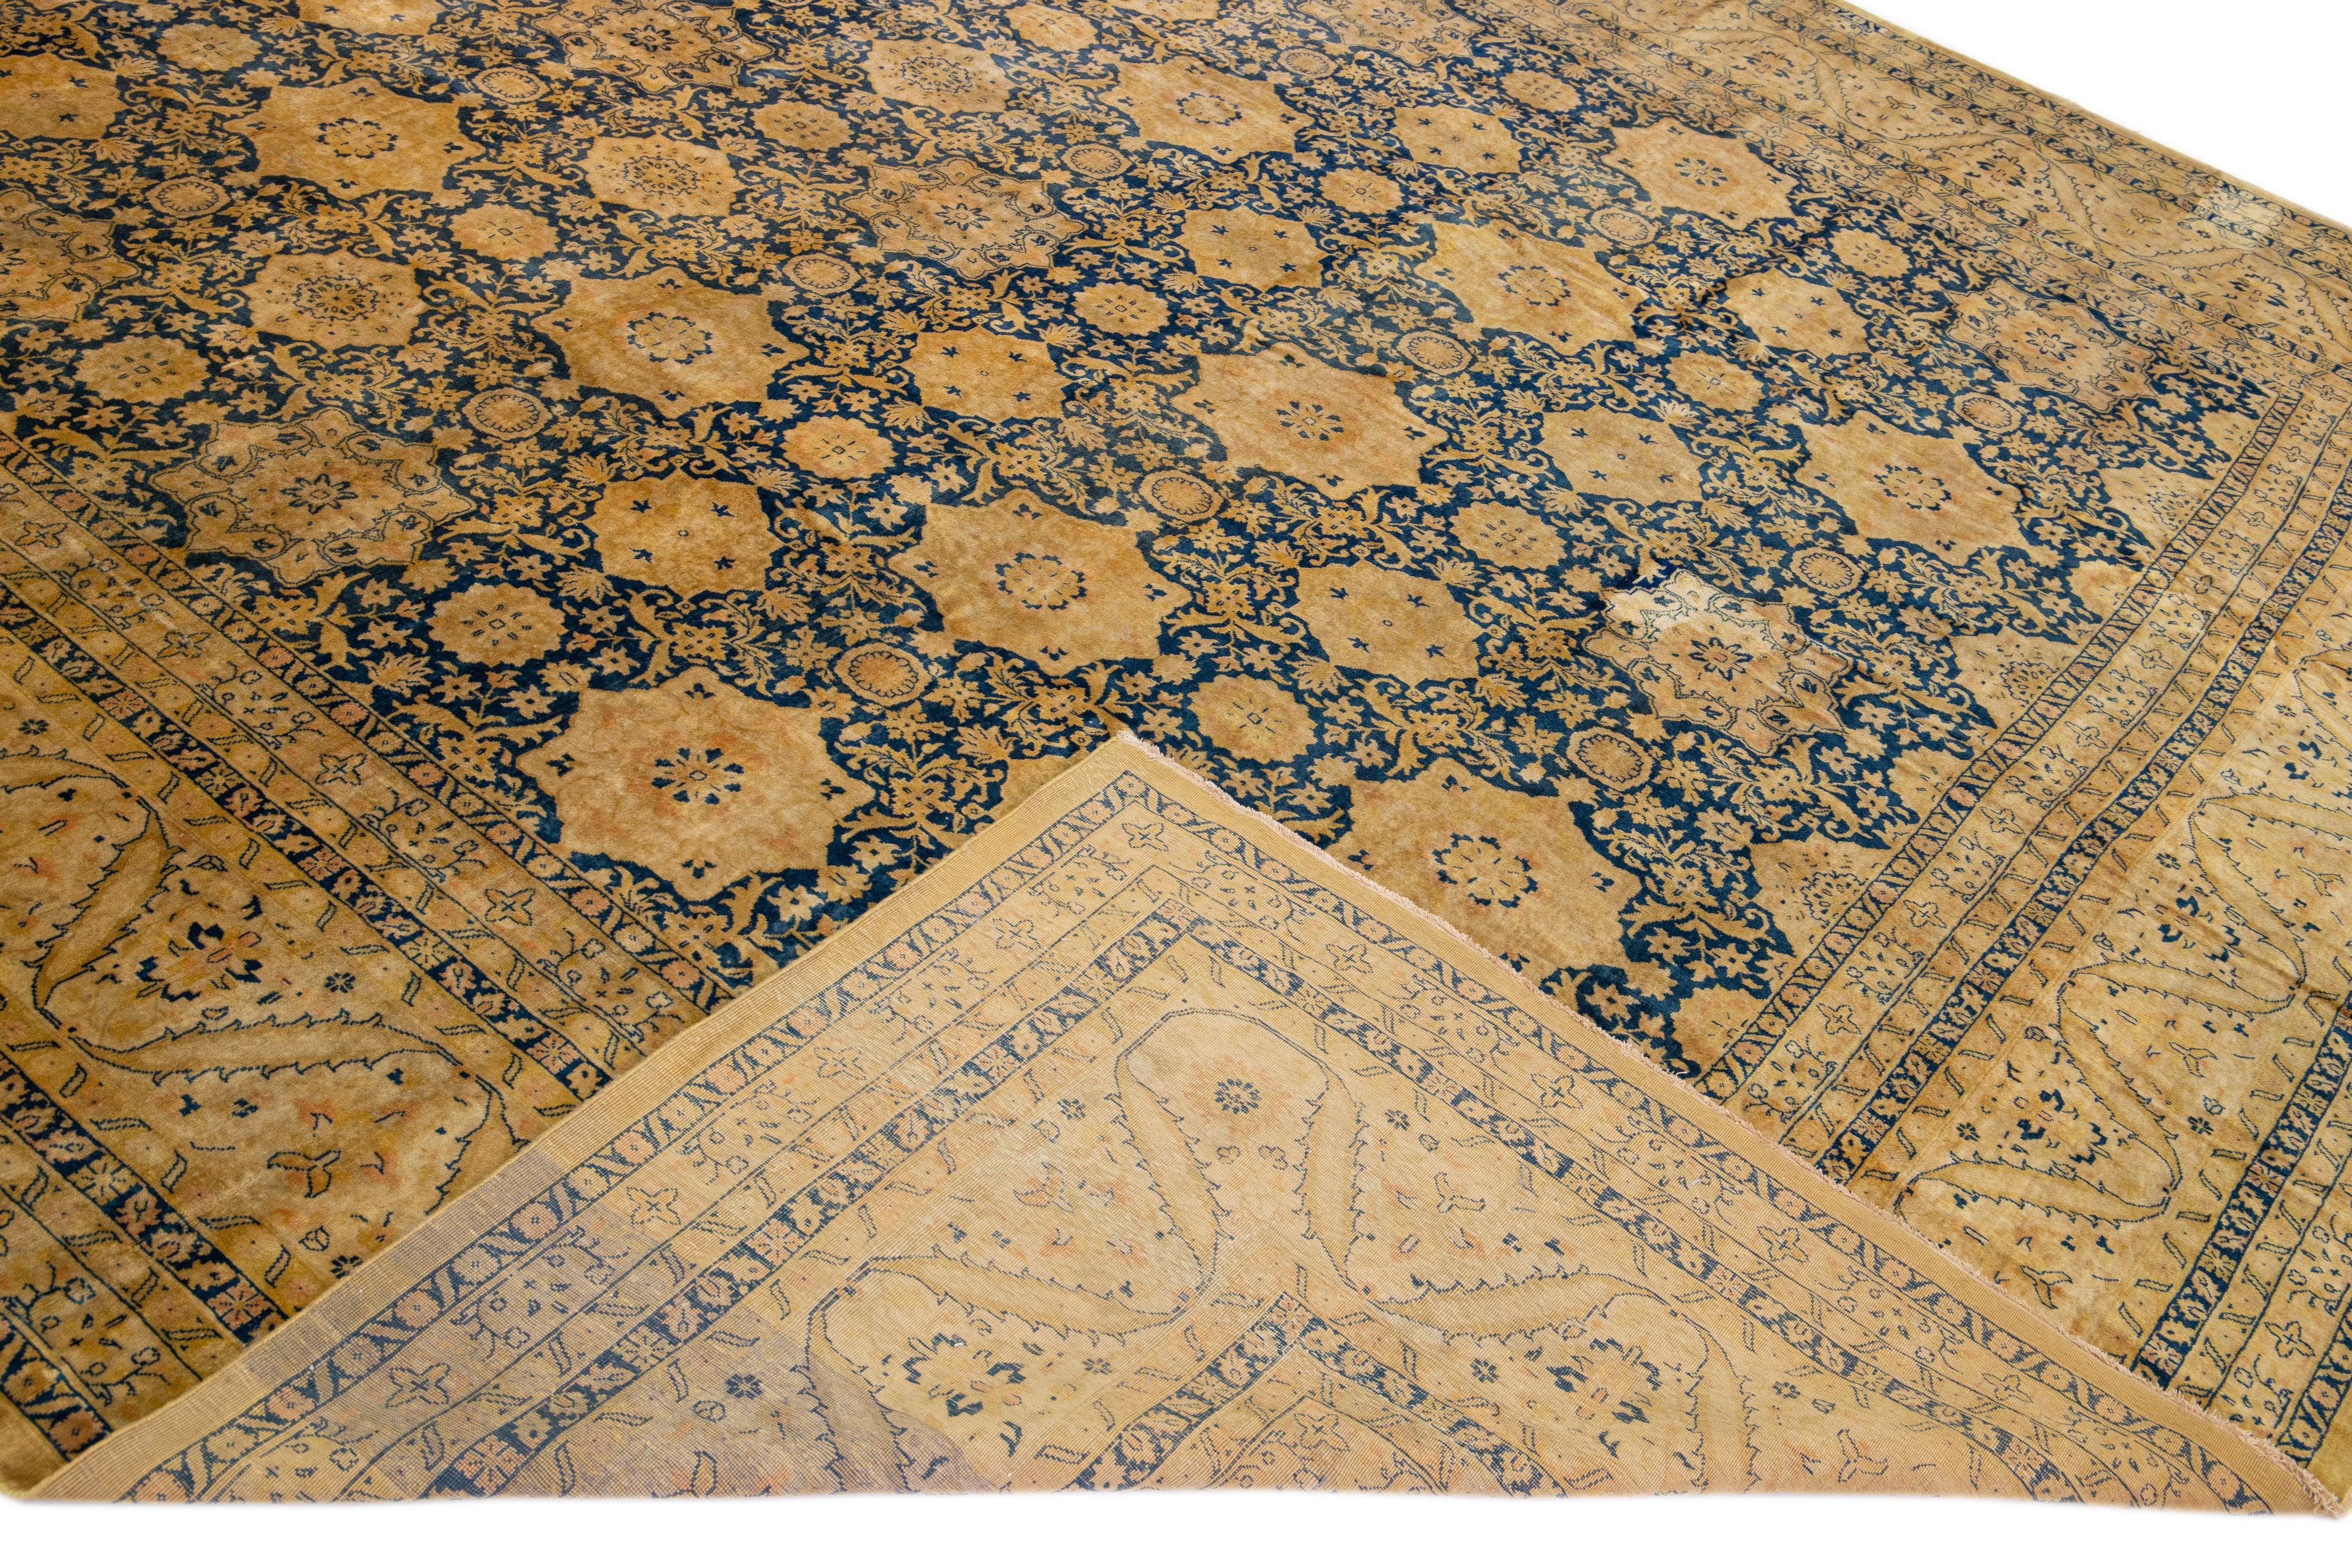 Beautiful antique hand-knotted wool rug with a blue field. This Indian rug has tan accents in a gorgeous all-over rosette pattern design.

This rug measures: 11'6